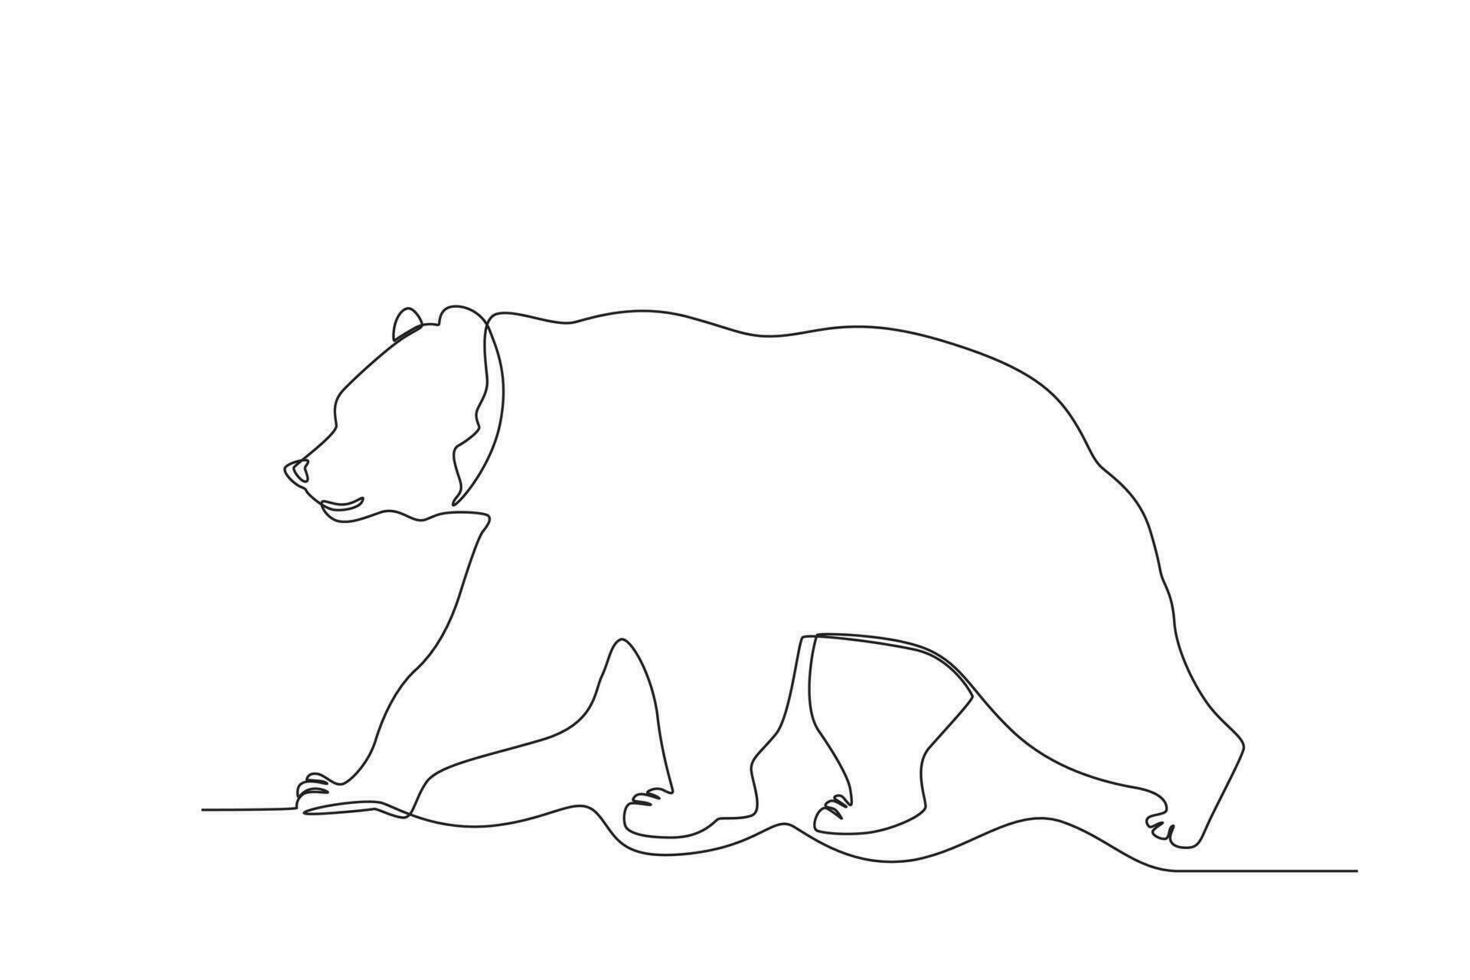 Single one line drawing of a bear. Continuous line draw design graphic vector illustration.